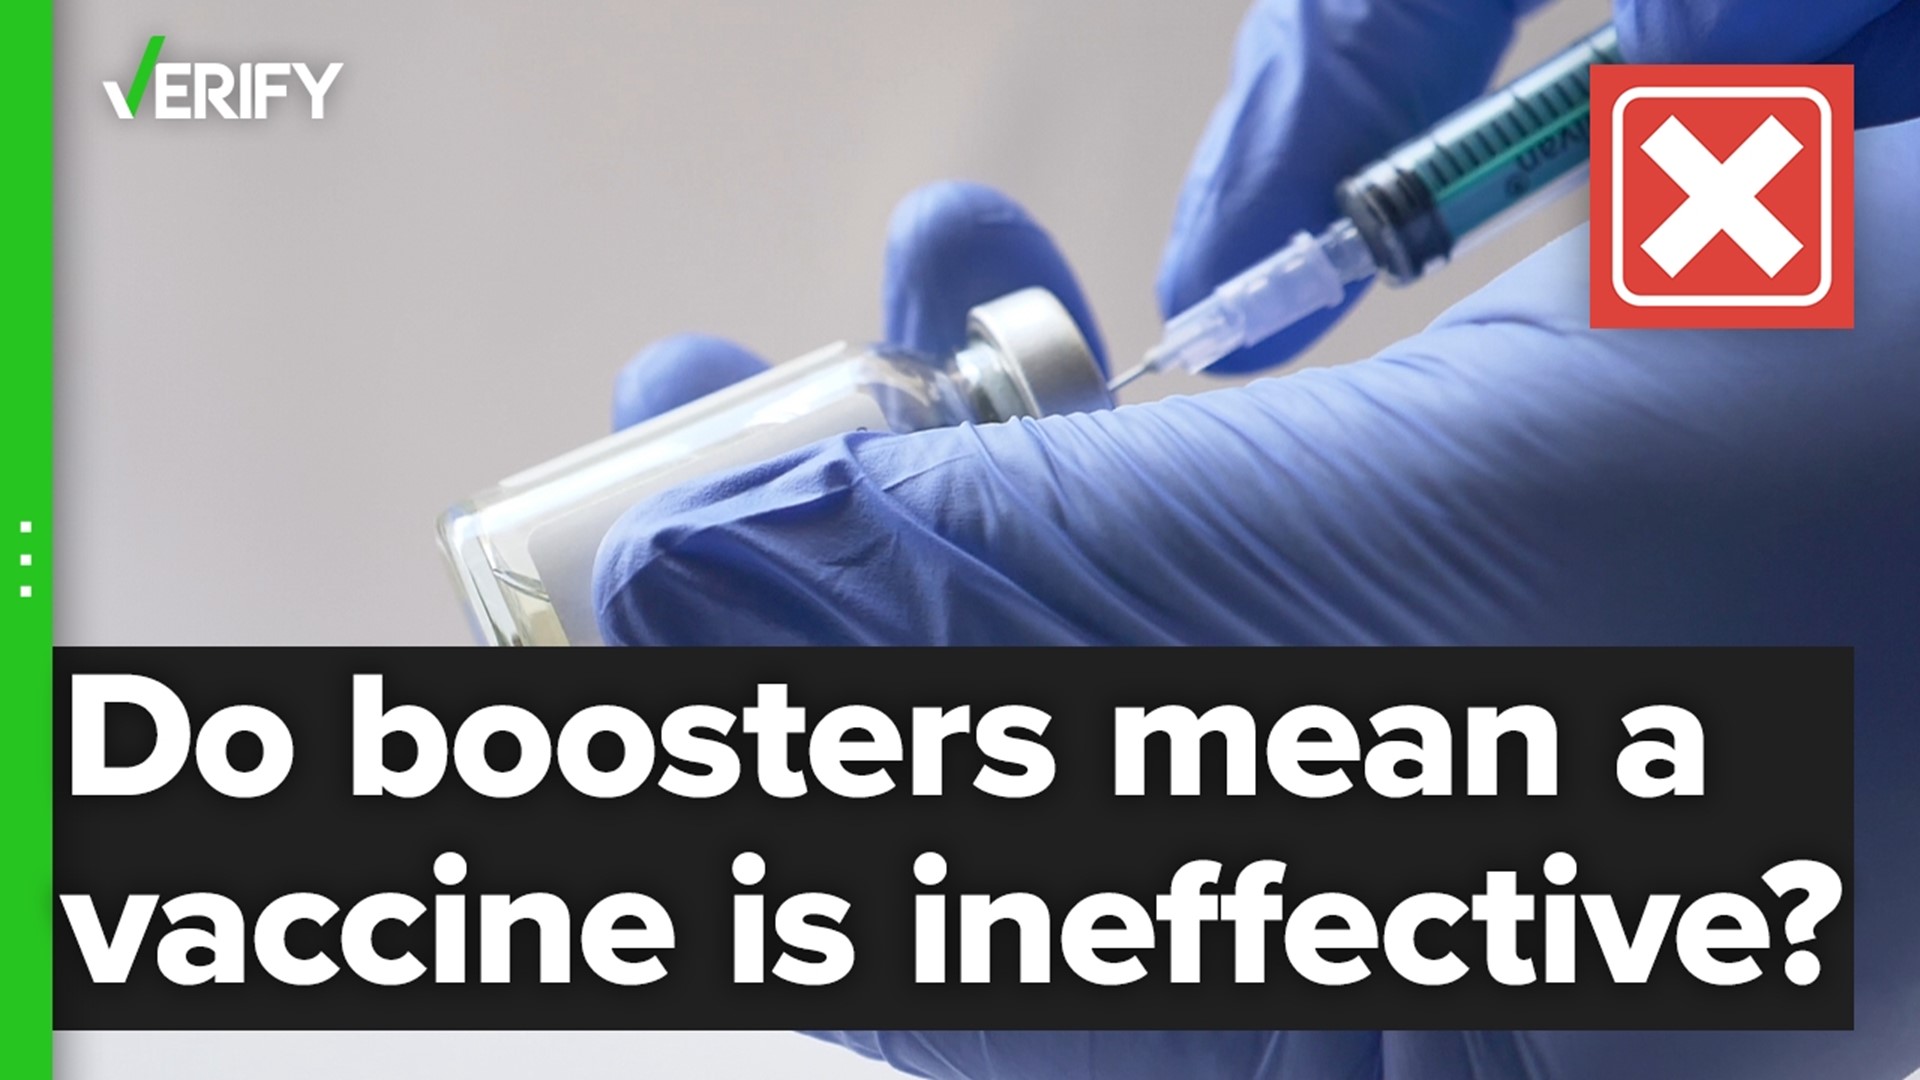 The VERIFY team looks into a claim that booster shots mean a vaccine was ineffective. Using sources from the FDA, CDC and a professor of Preventative Medicine, due t